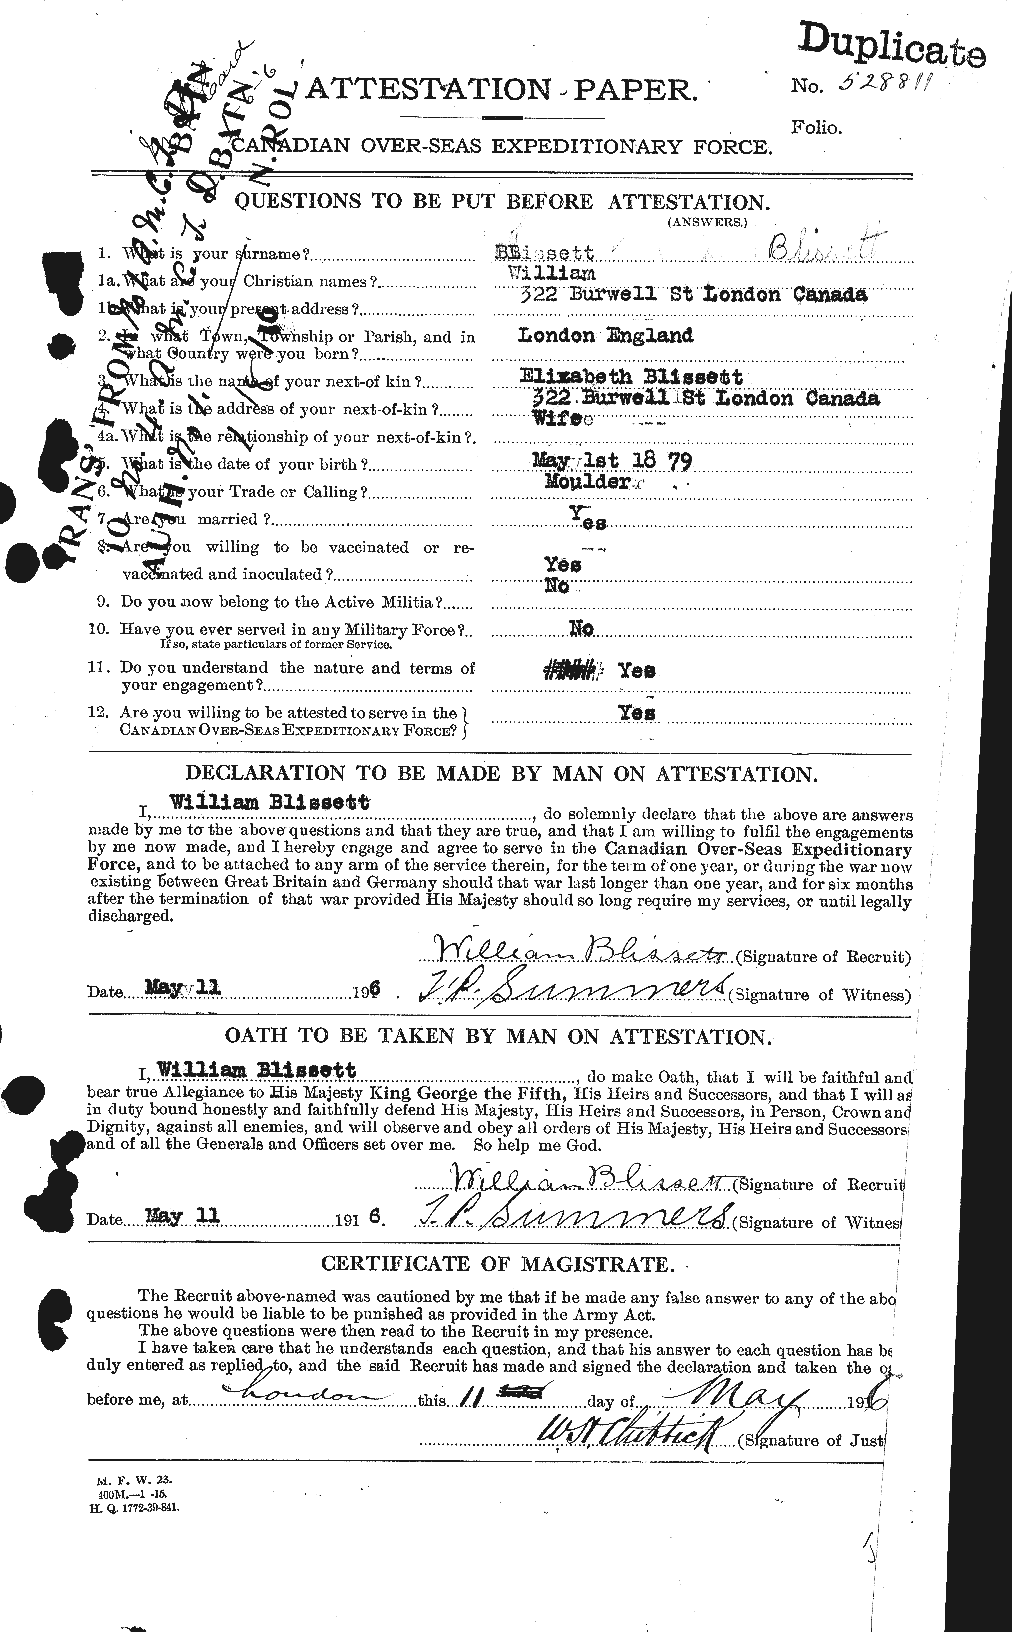 Personnel Records of the First World War - CEF 248385a